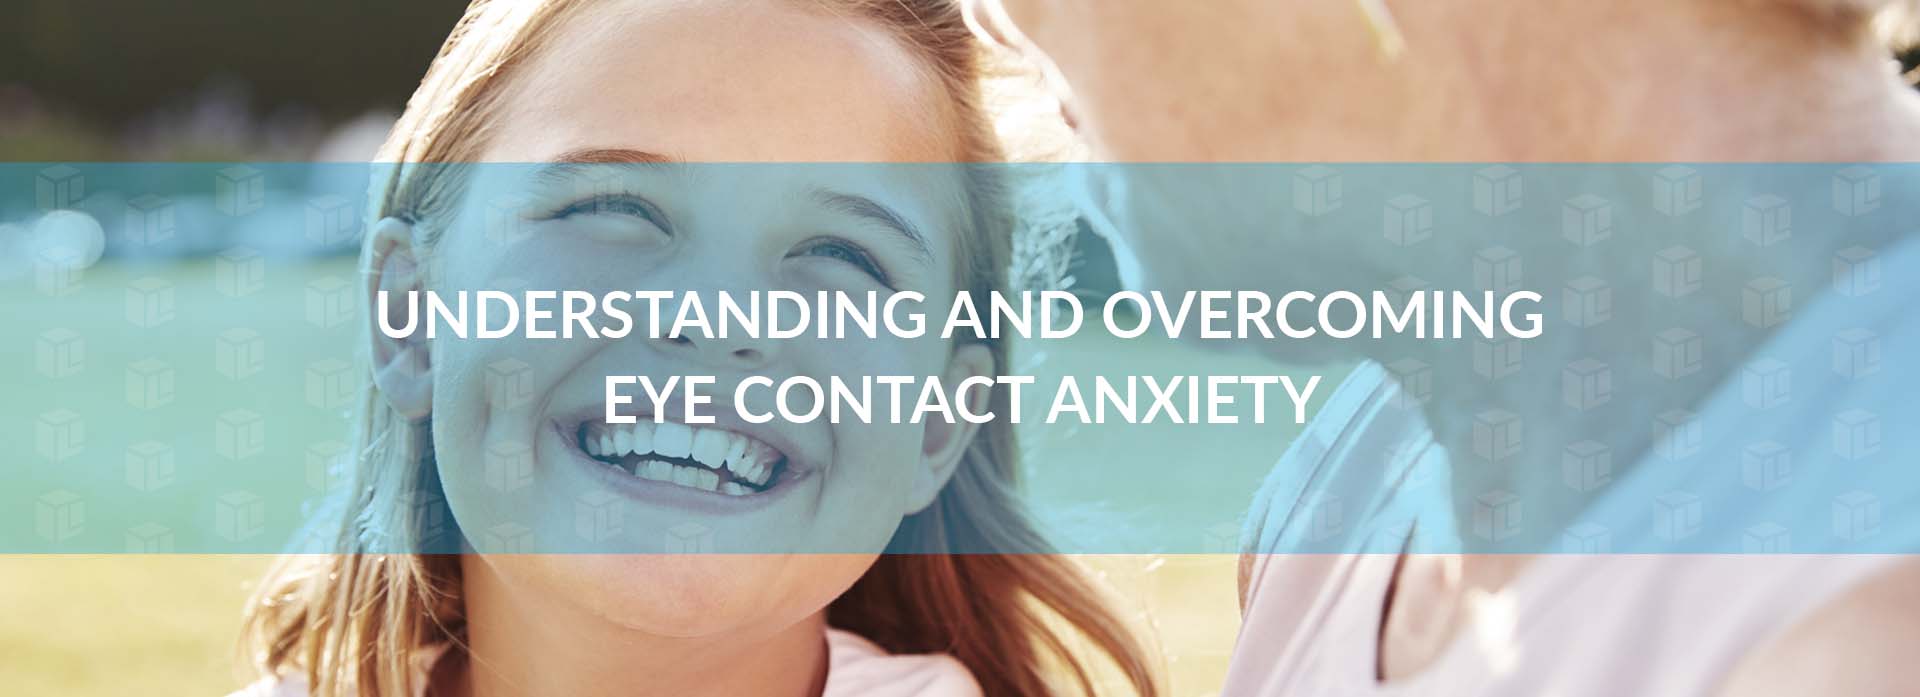 Understanding and Overcoming Eye Contact Anxiety